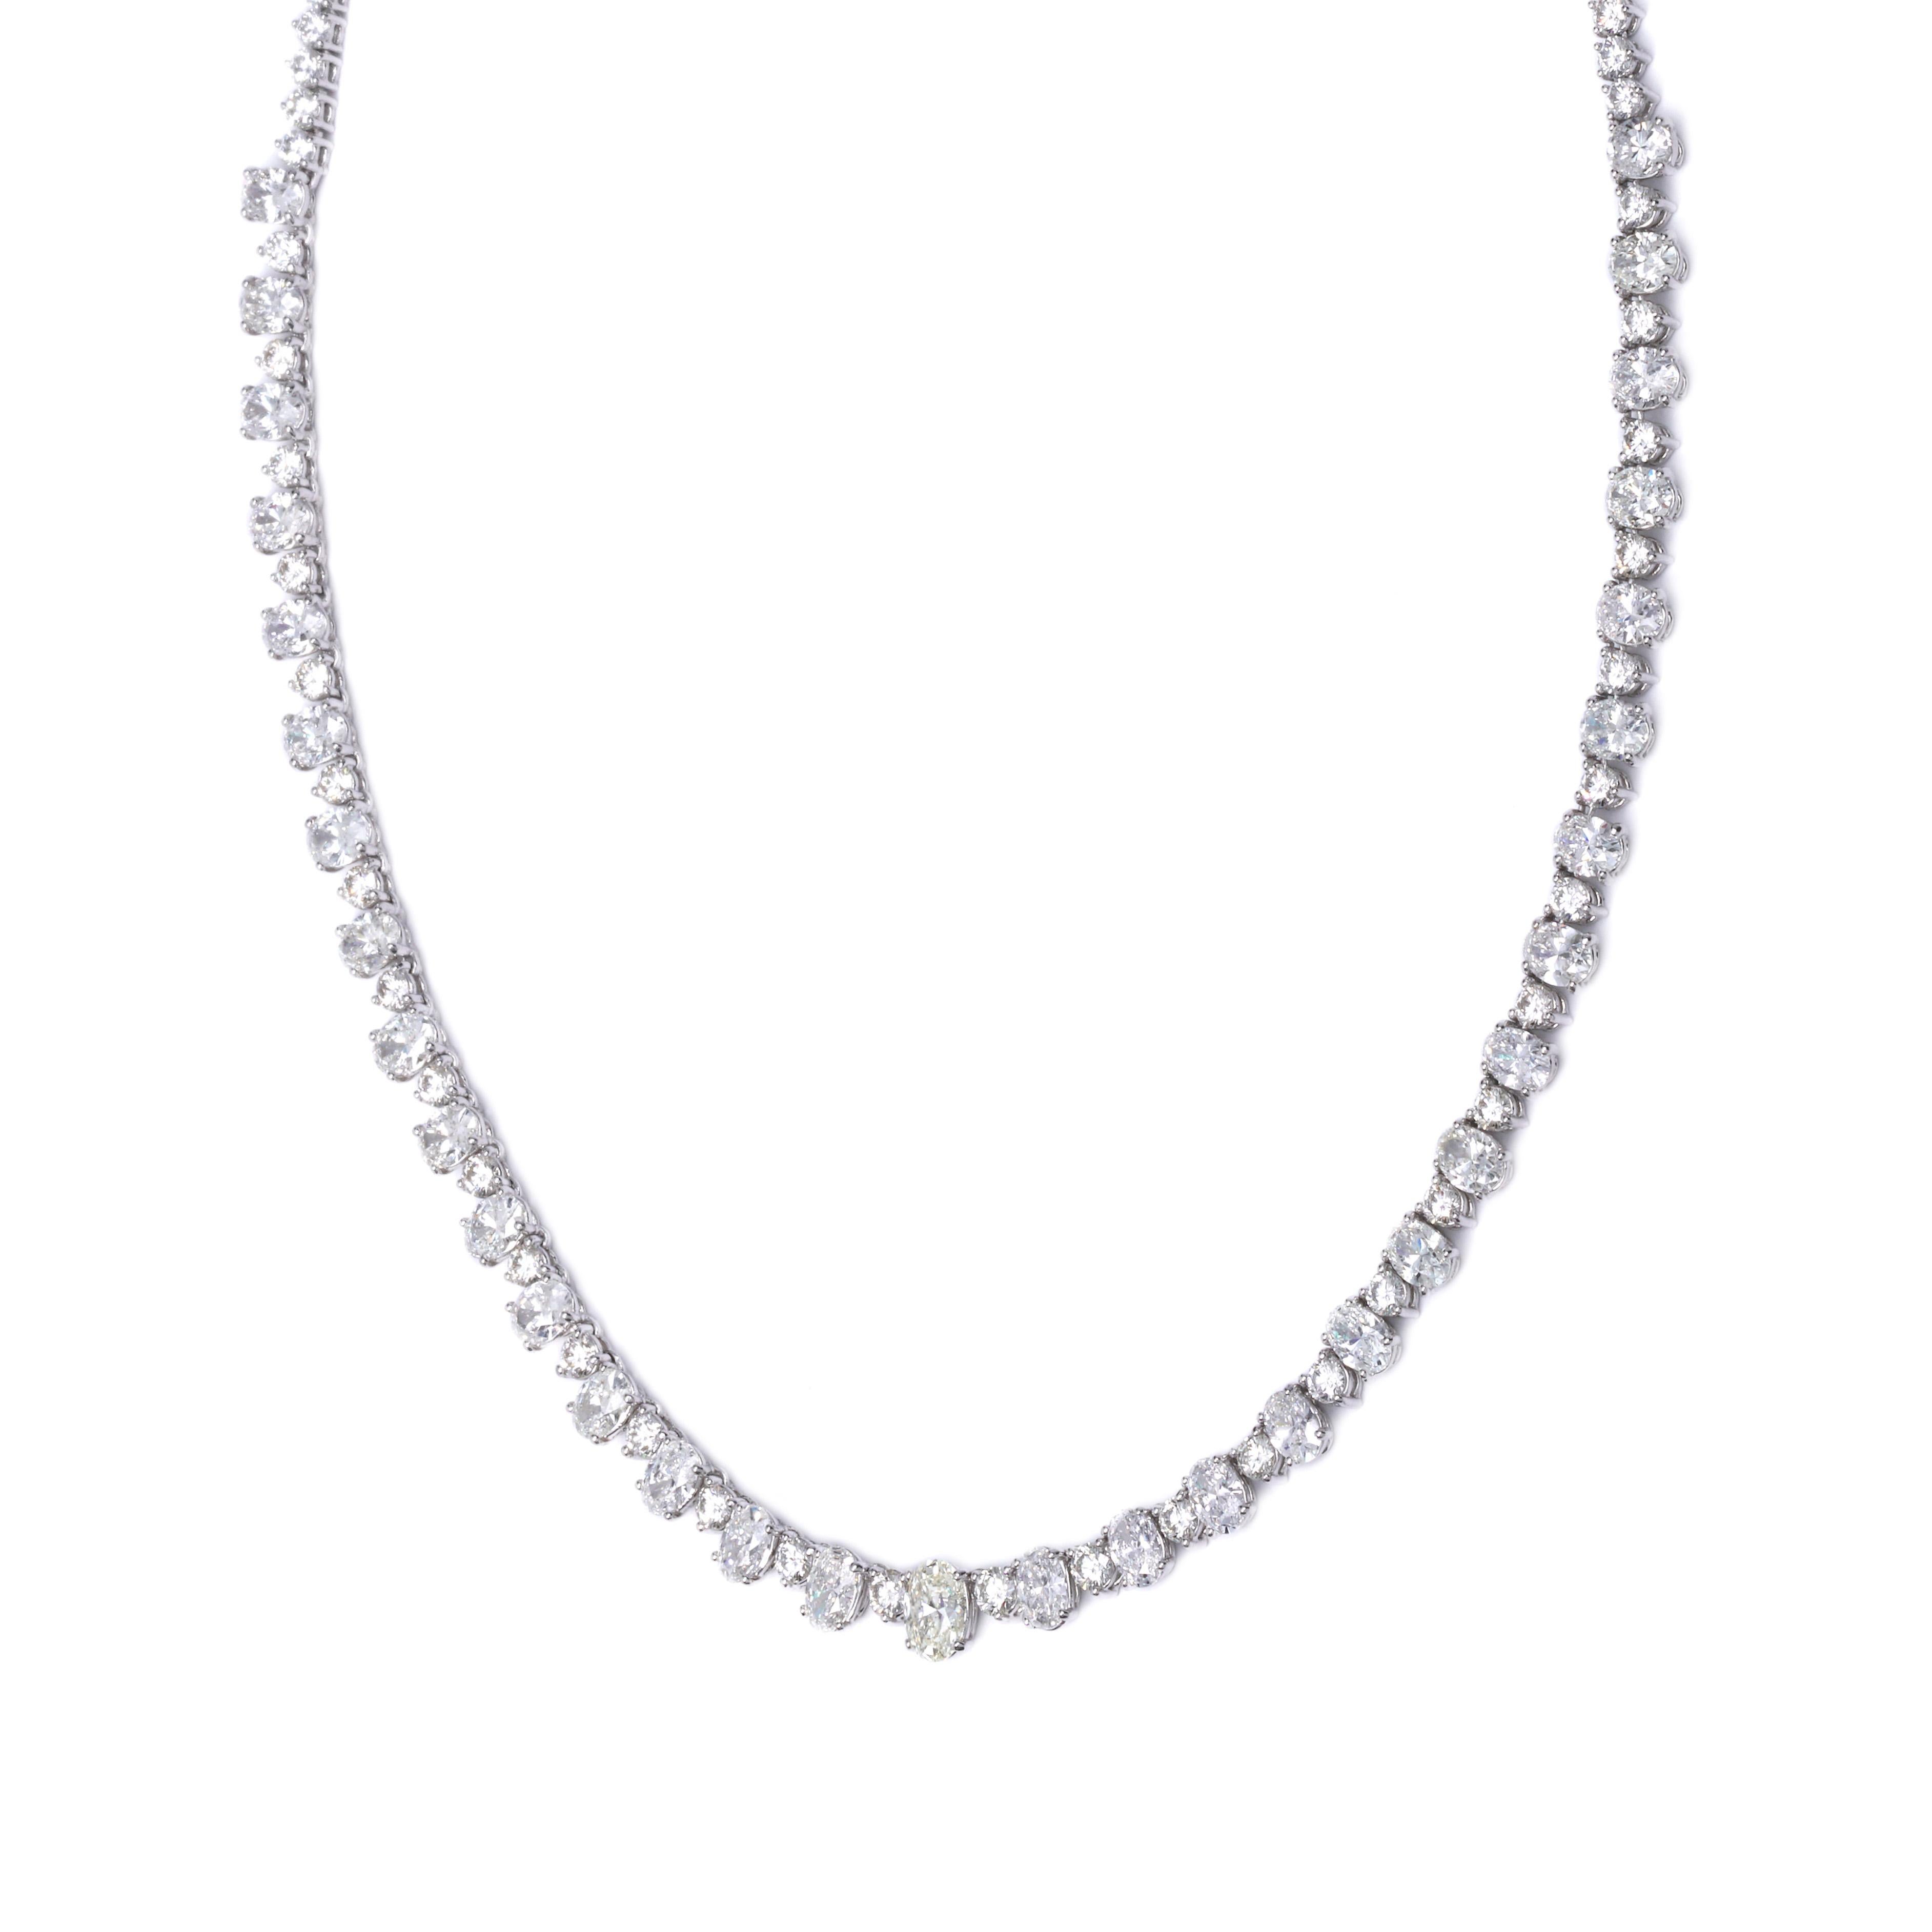 This necklace is 17 inches in length, made of 18K white gold. It contains oval G-color, VS2-SI1 clarity diamonds weighing 10.62 CTTW, round G-color and VS2-SI1 clarity diamonds weighing 5.69 CTTW.